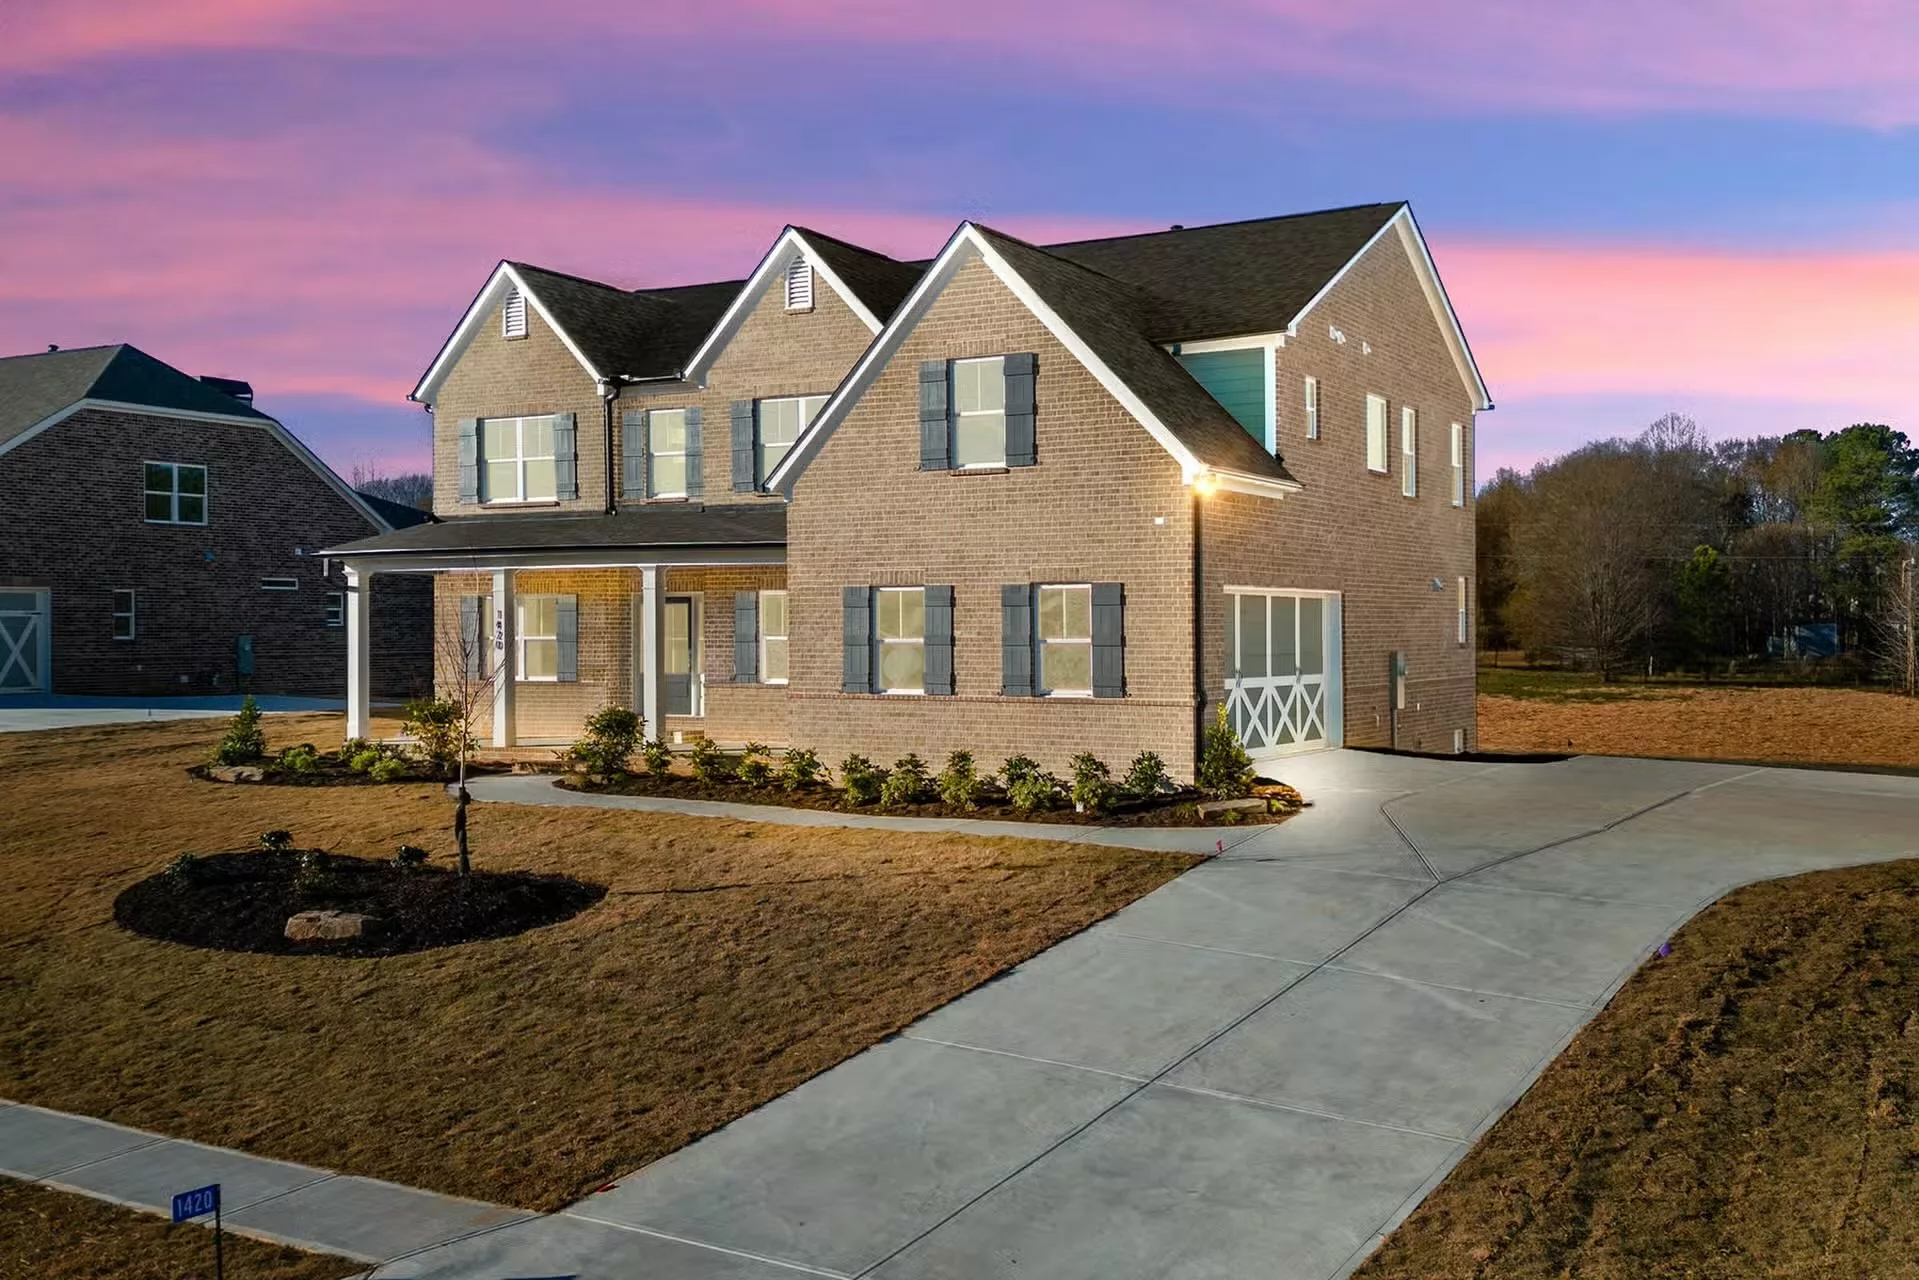 1420 Stonewood Field Rd. Watkinsville, GA | Stonewood Community | Single-Family Home for Sale by SR Homes | Stonewood Community | Single-Family Home for Sale by SR Homes